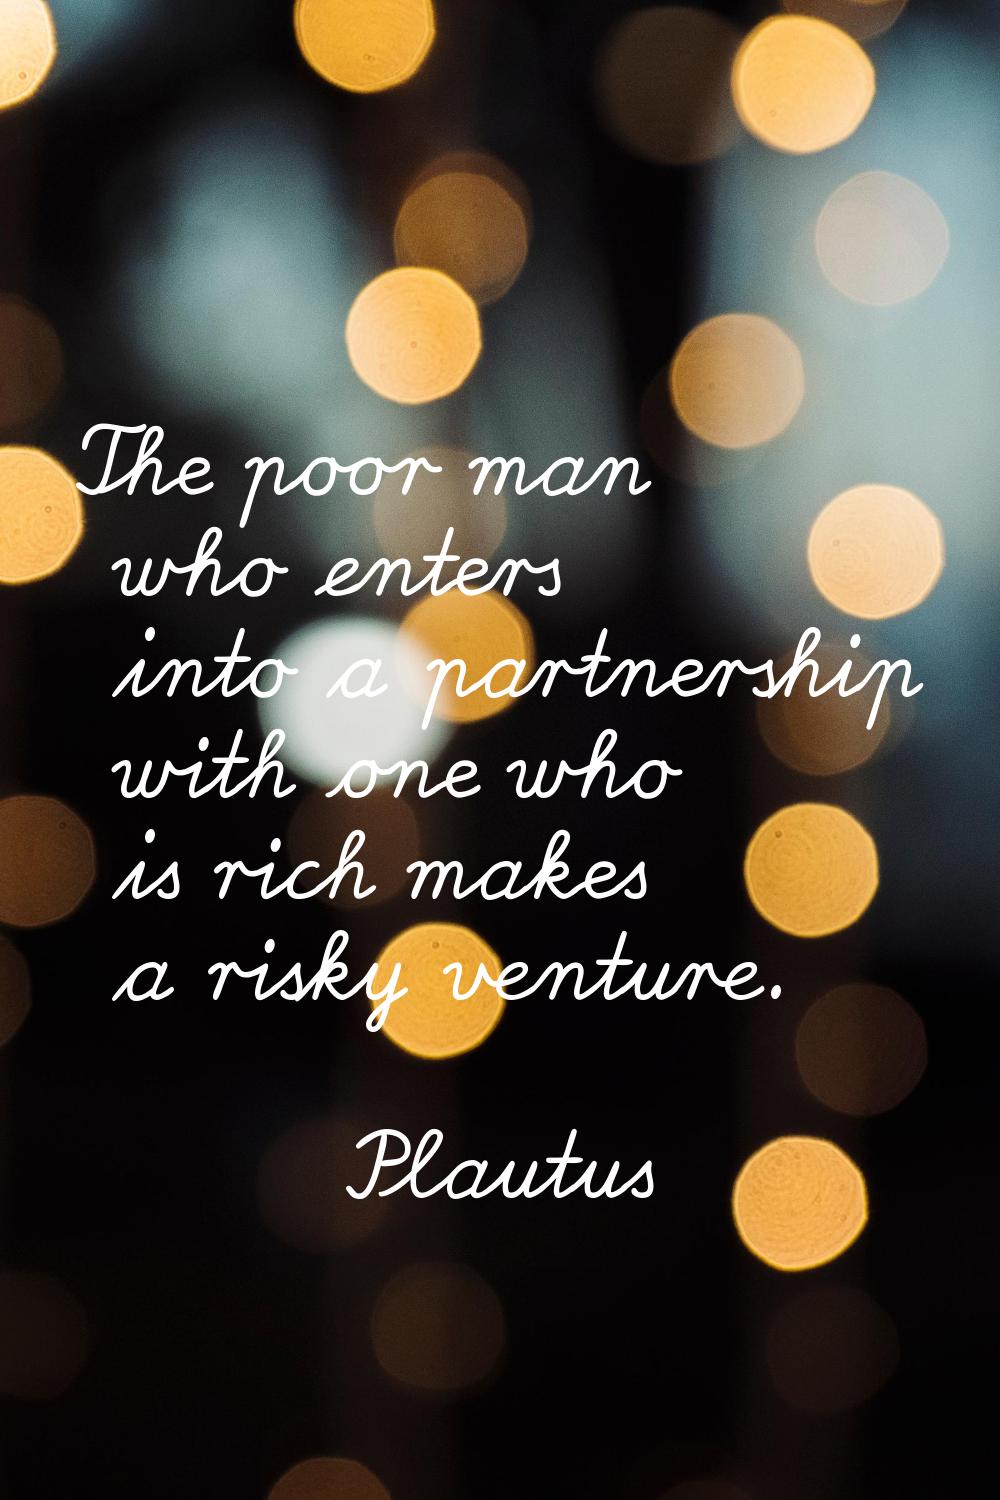 The poor man who enters into a partnership with one who is rich makes a risky venture.